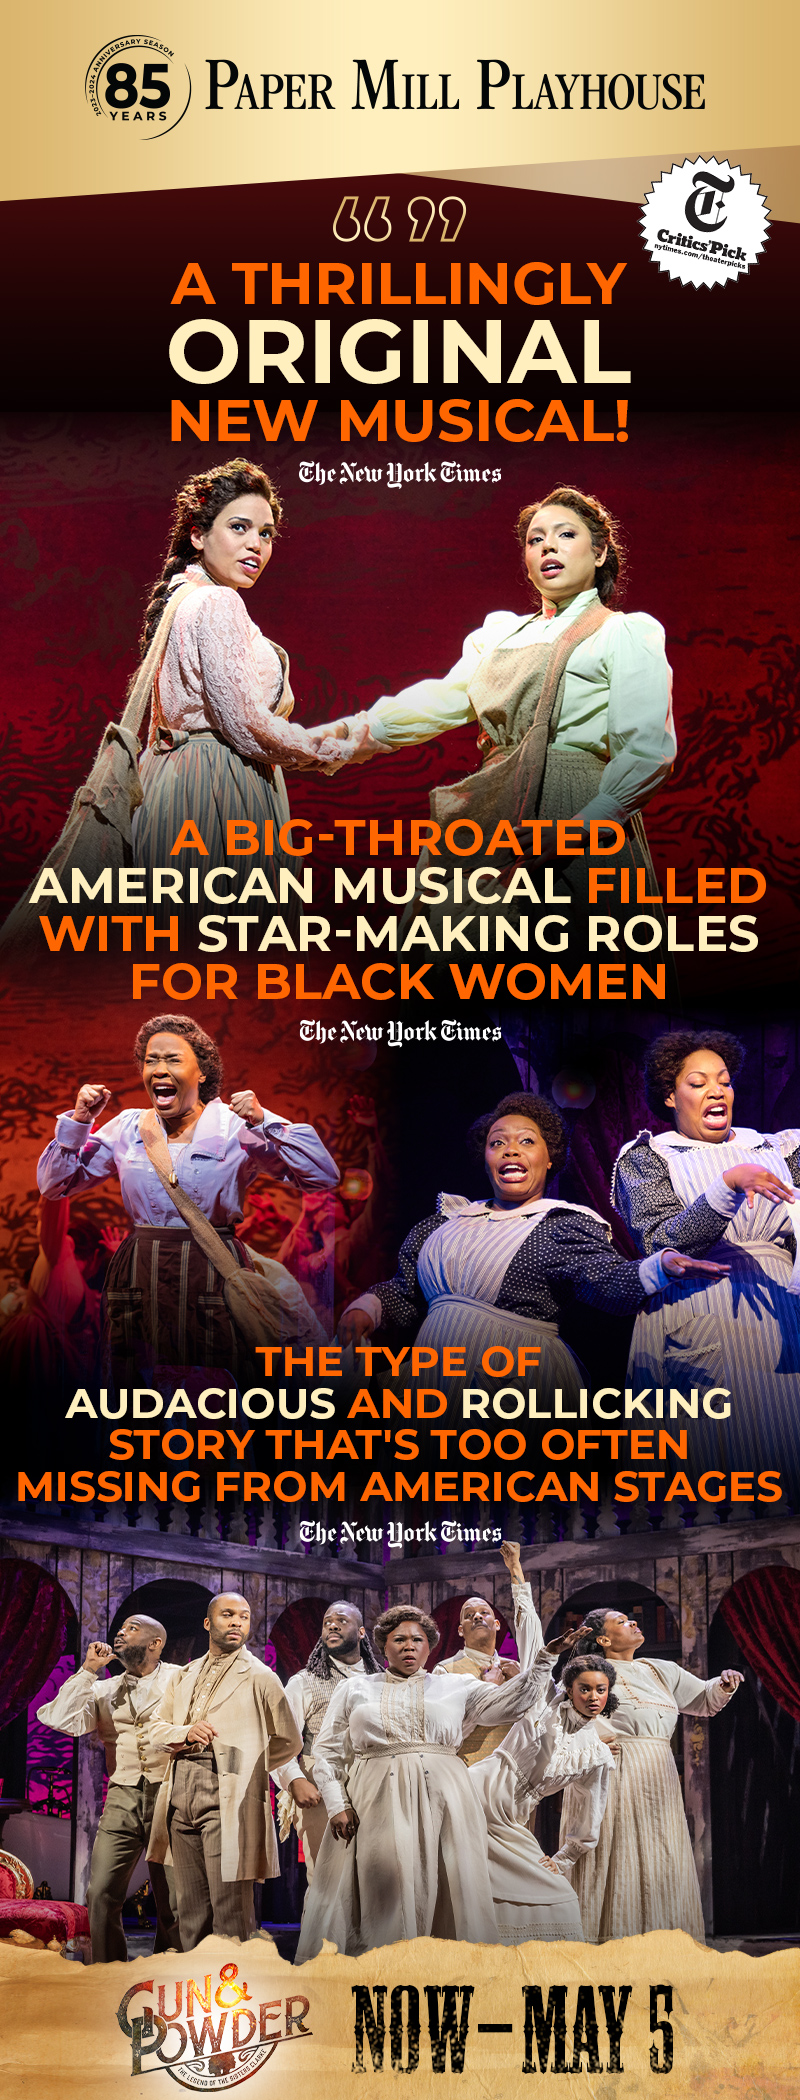 Paper Mill Playhouse: Gun & Powder playing now through May 5. New York Times Critic Pick. "A thrillingly original new musical!" "A big-throated American musical filled with star-making roles for Black women." "The type of audacious and rollicking story that's too often missing from American stages."